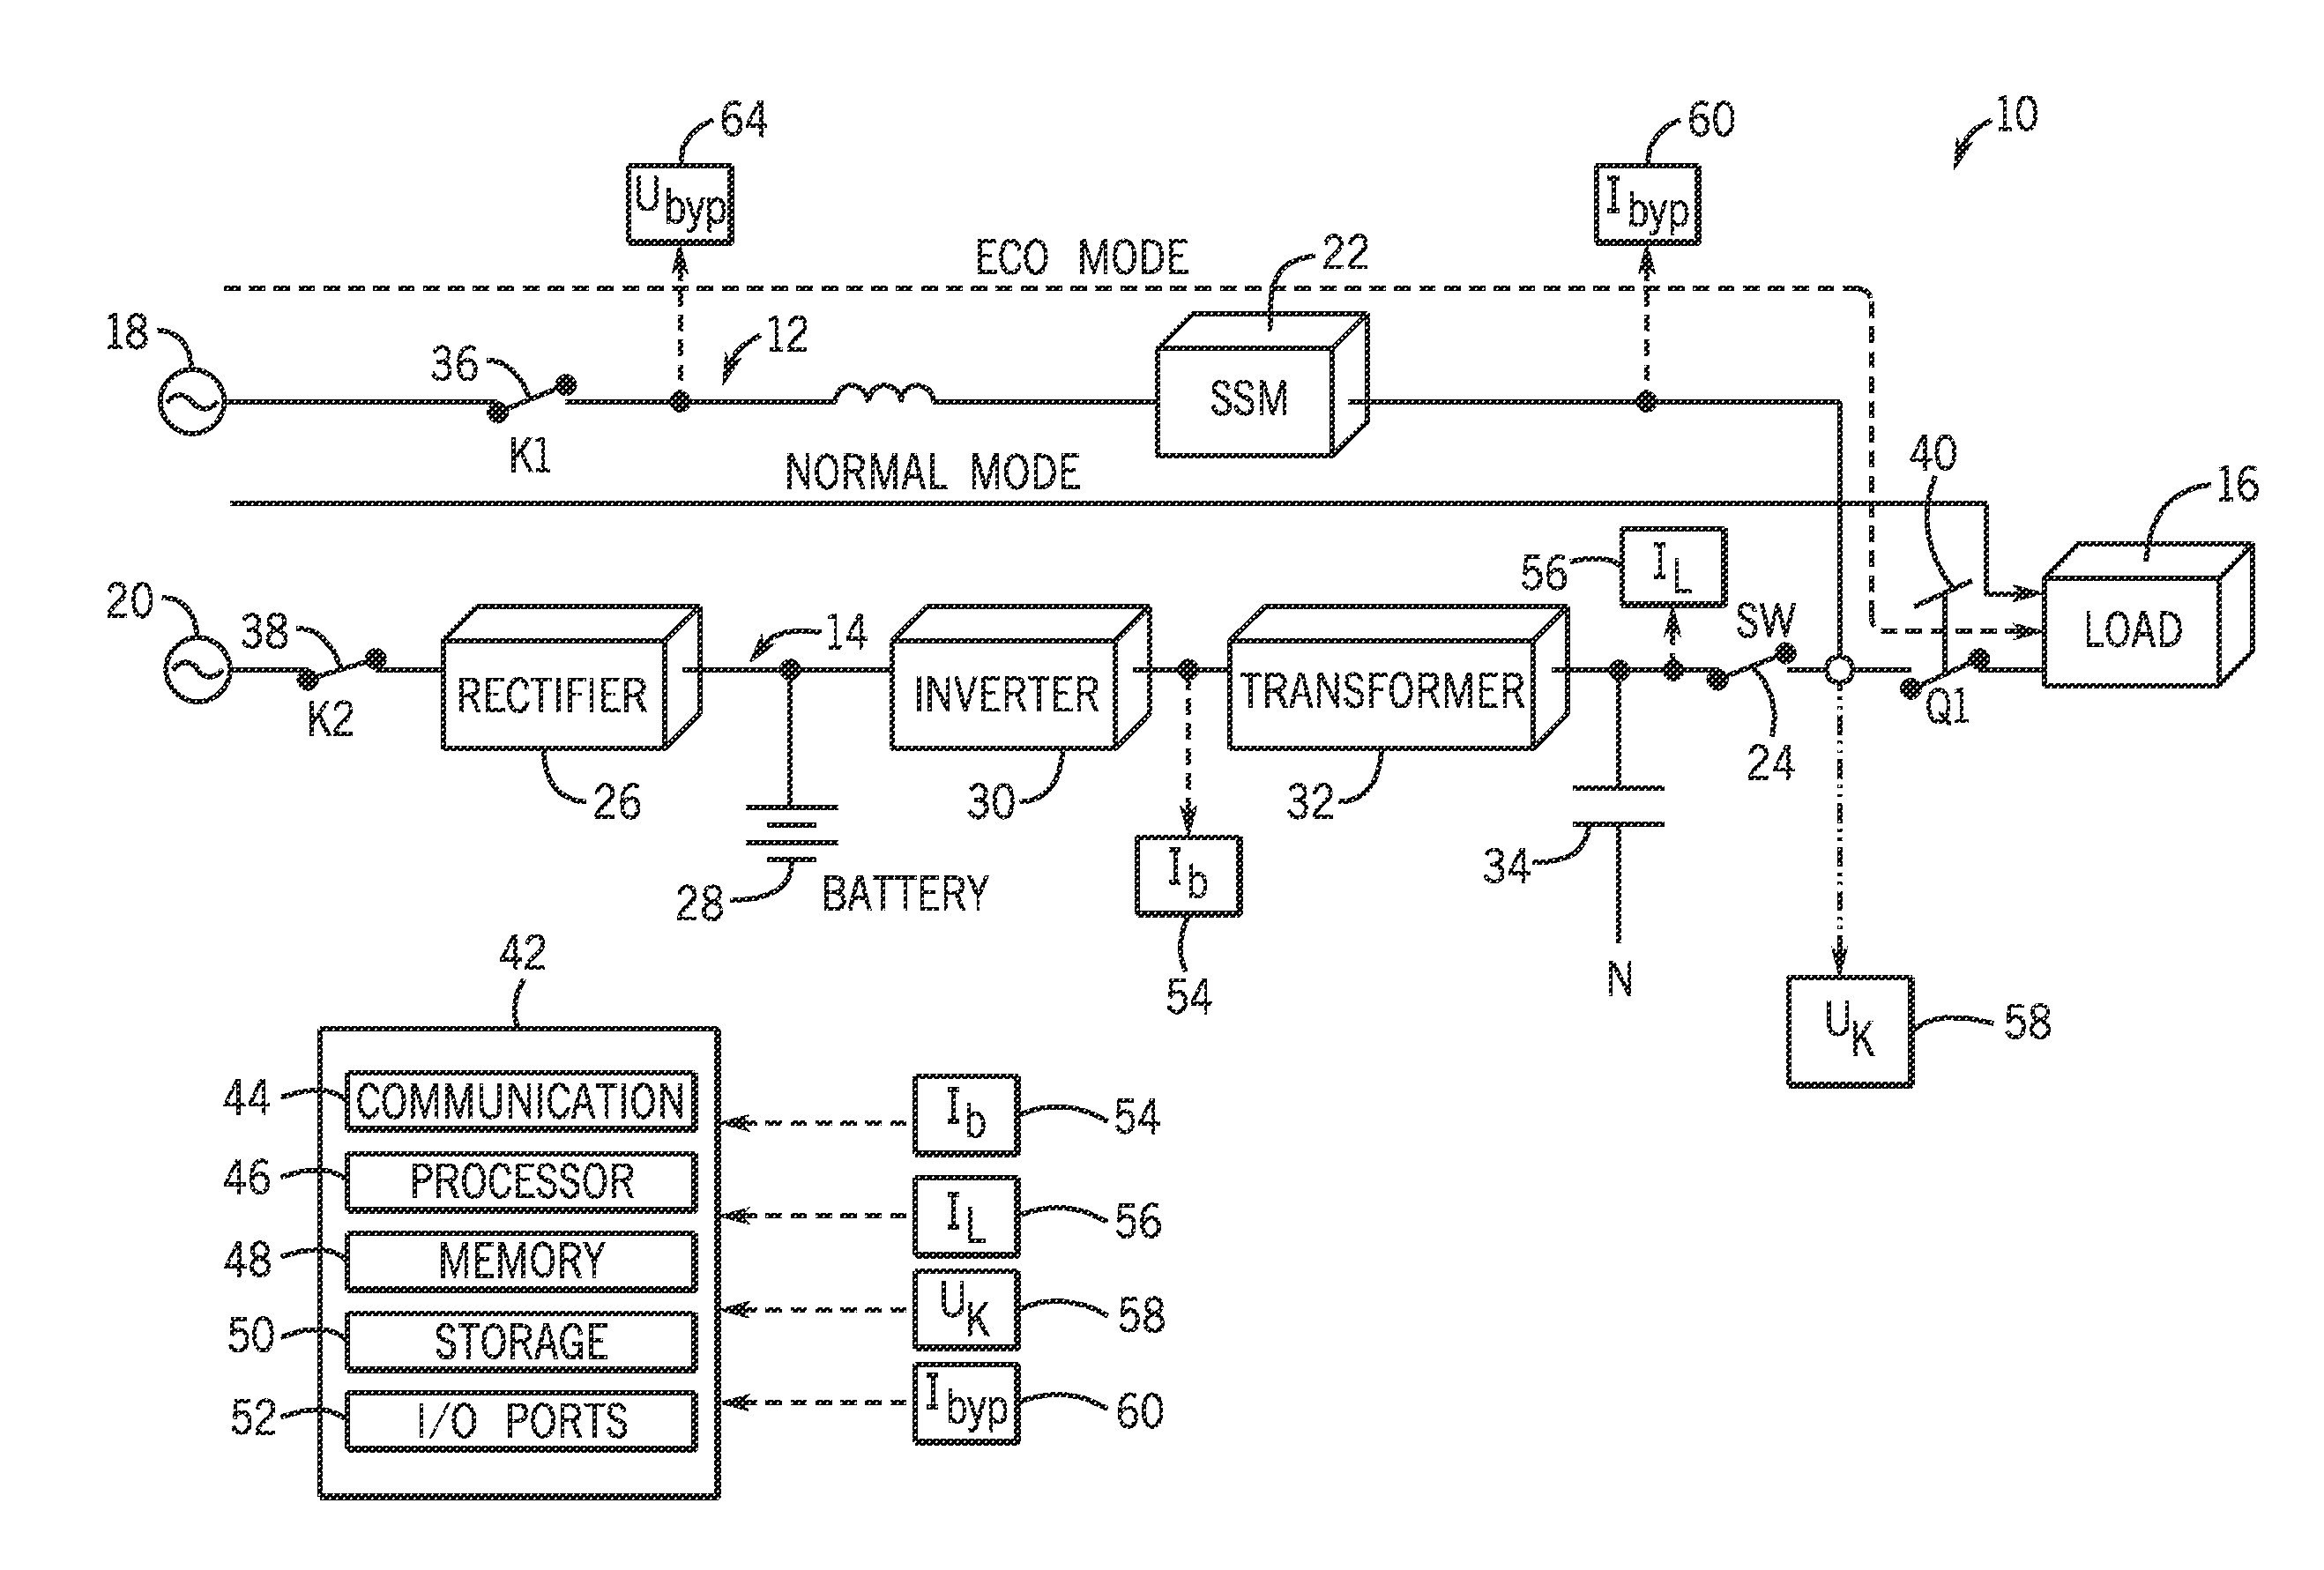 Systems and methods for detecting power quality of uninterrupible power supplies